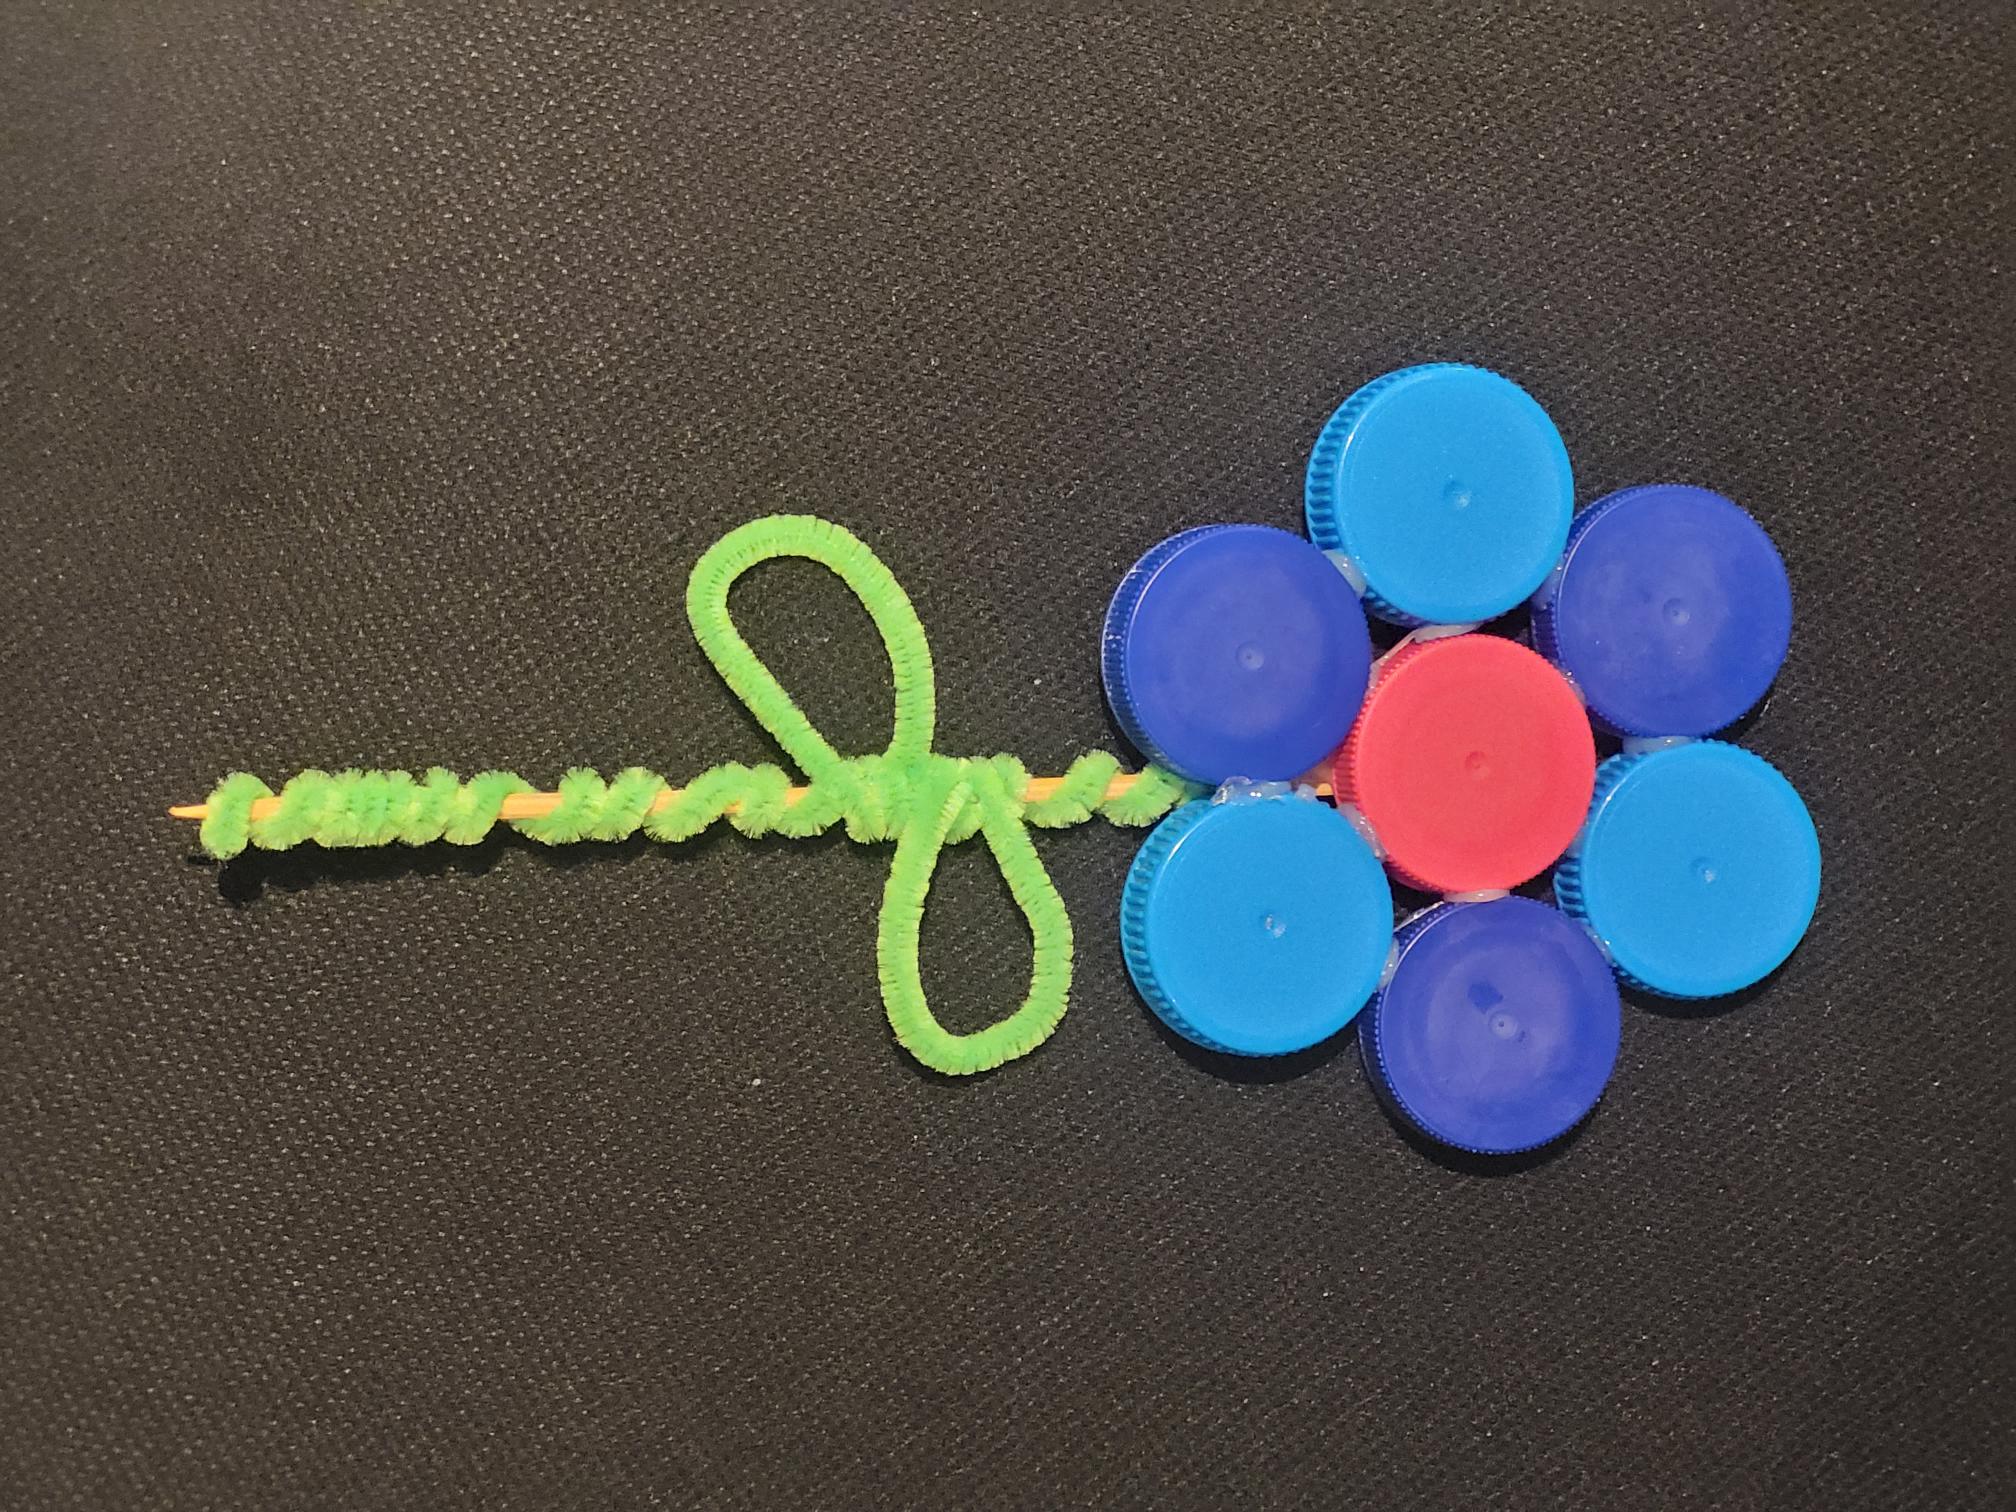 A flower made out of blue bottle capes and a green pipecleaner for the stalk.